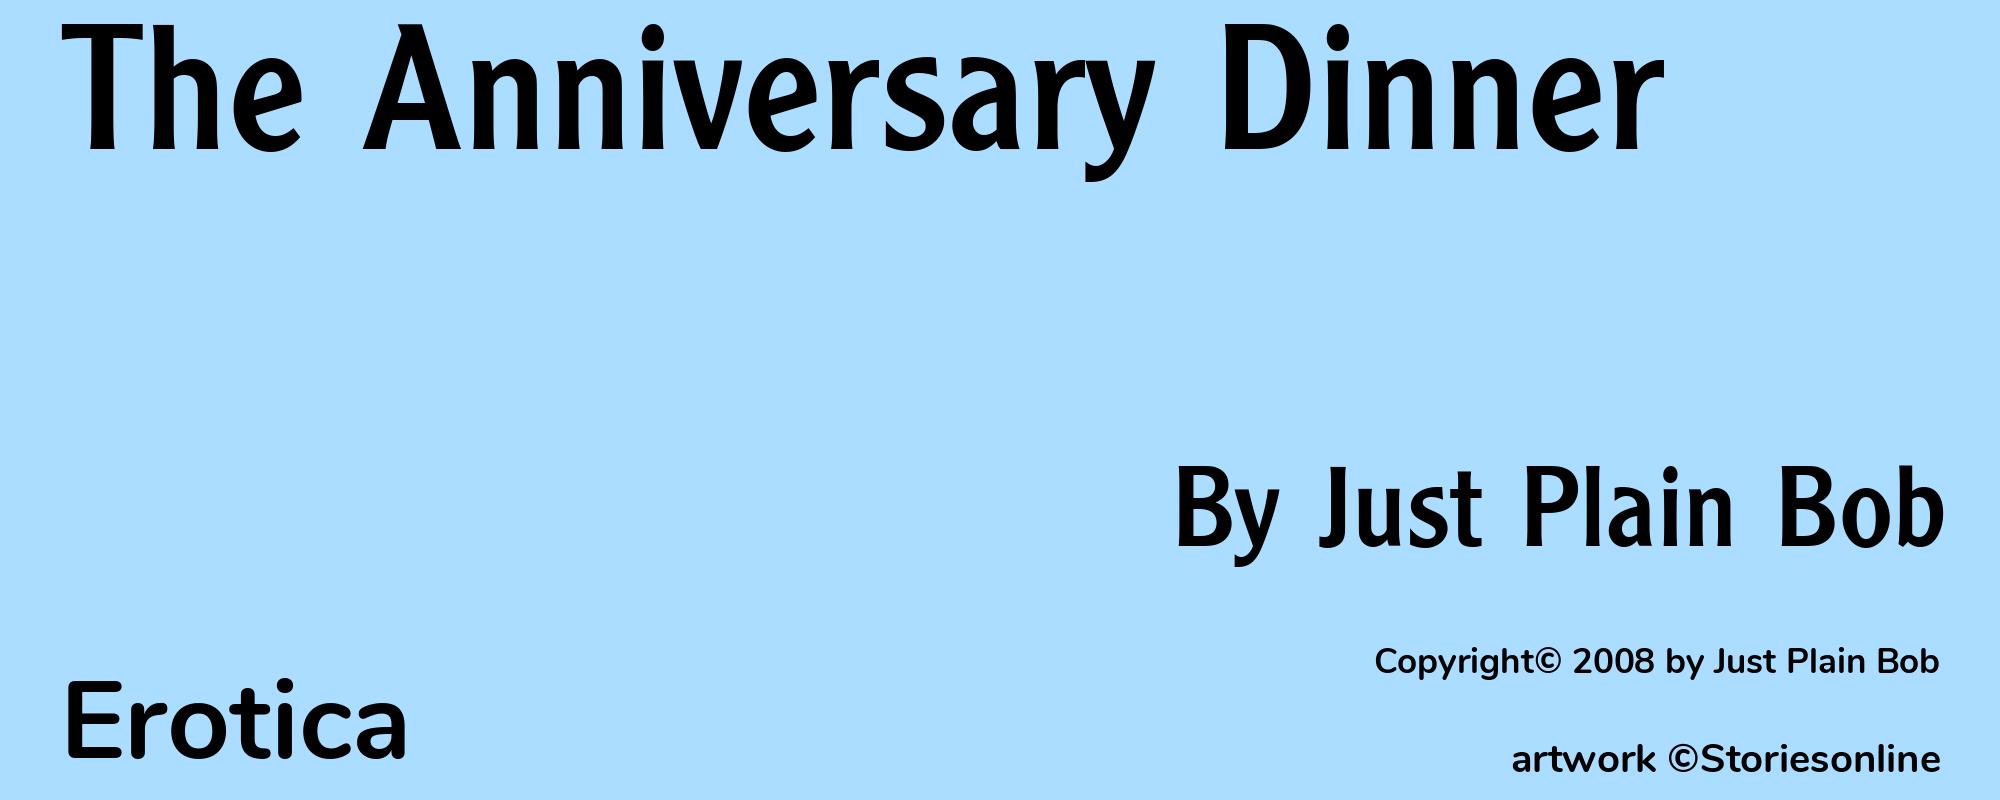 The Anniversary Dinner - Cover